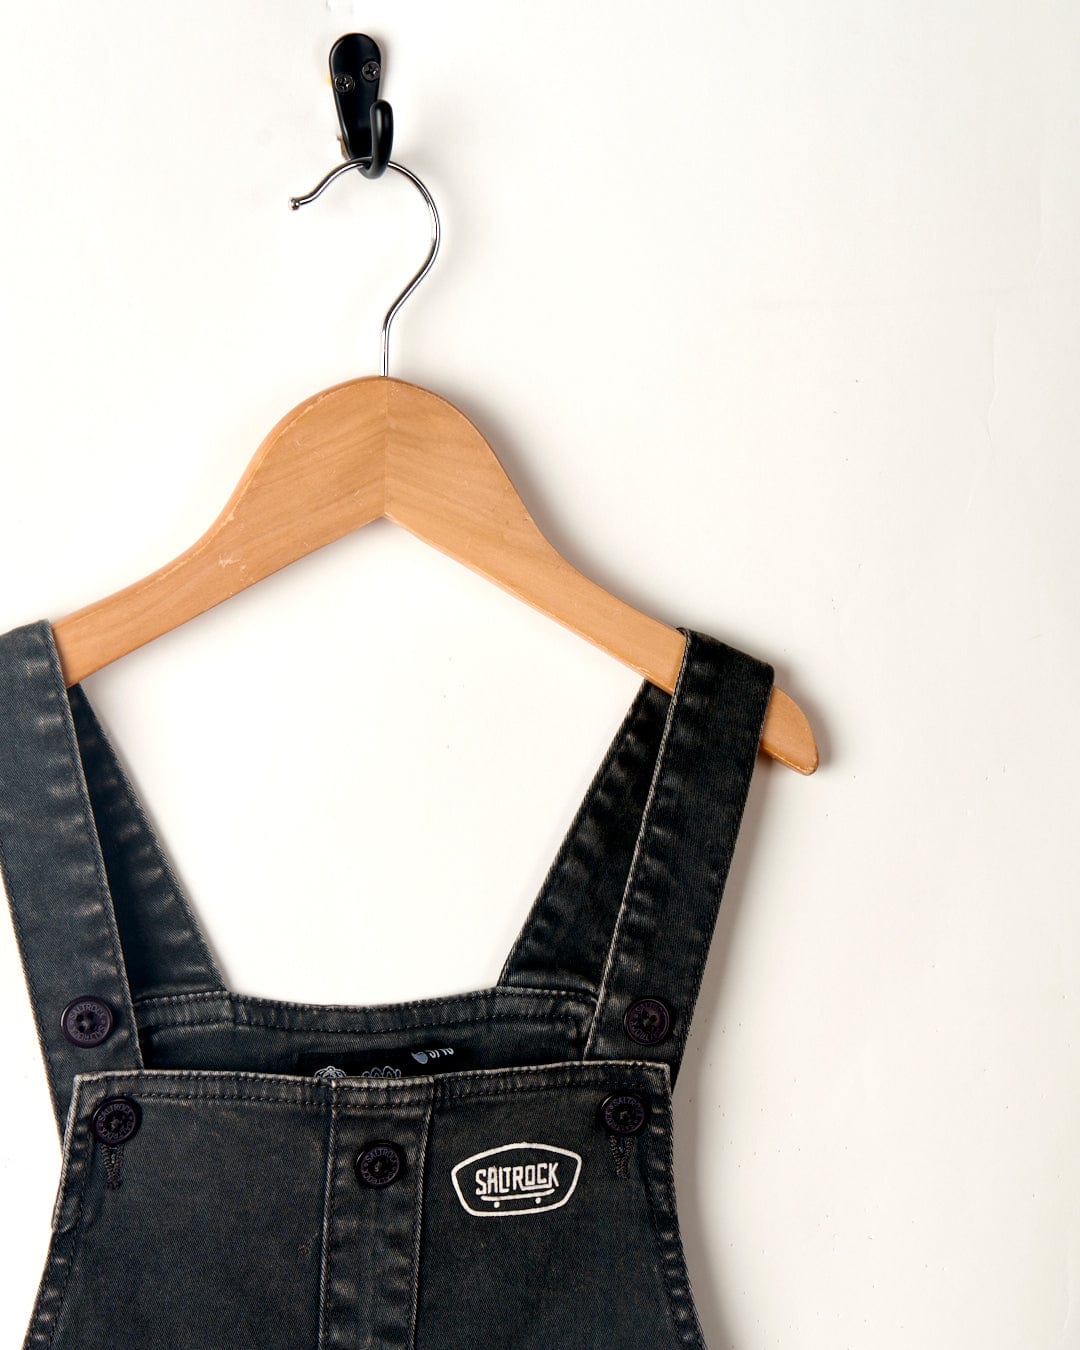 Saltrock Lyn-Z - Kids Dungarees - Washed Black with adjustable straps hanging on a wooden hanger against a plain white background.